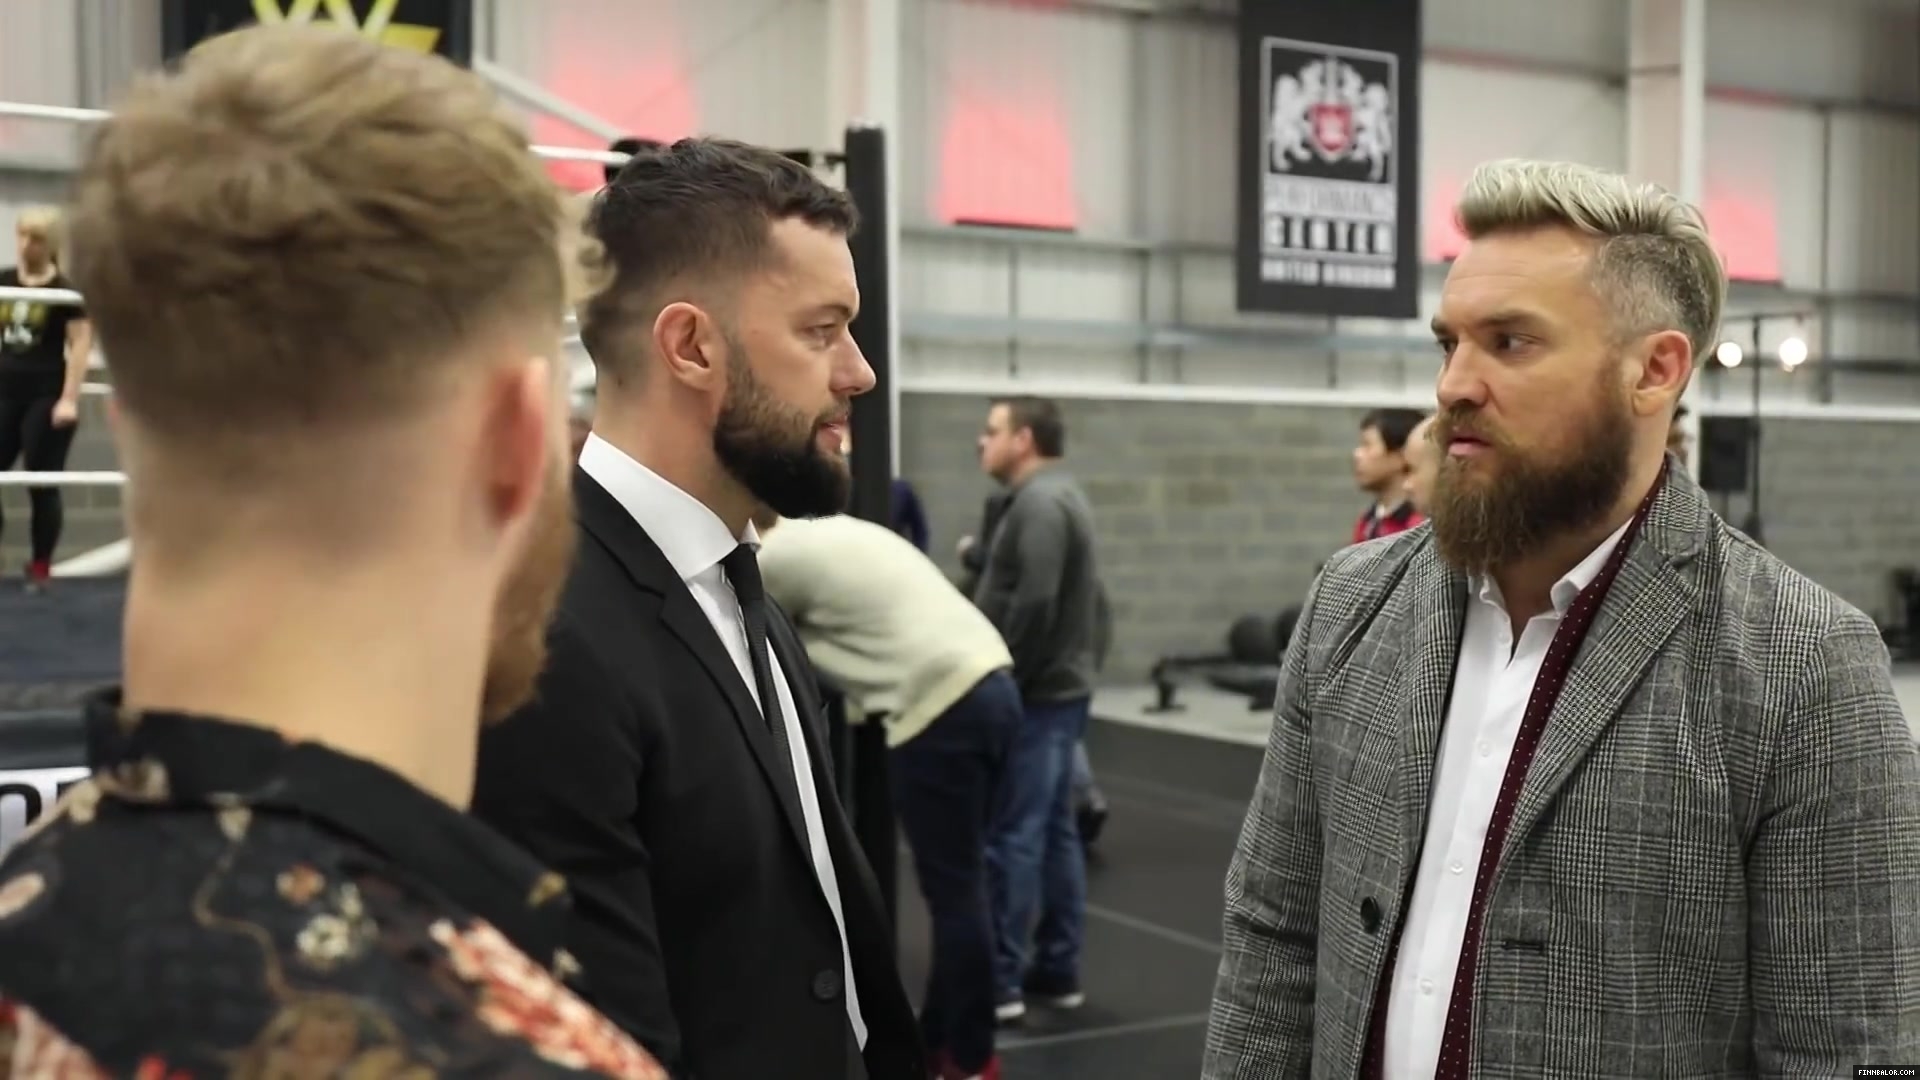 WWE_Superstar_FINN_BALOR_joins_MOUSTACHE_MOUNTAIN_at_the_opening_of_the_NXT_UK_PC_100.jpg